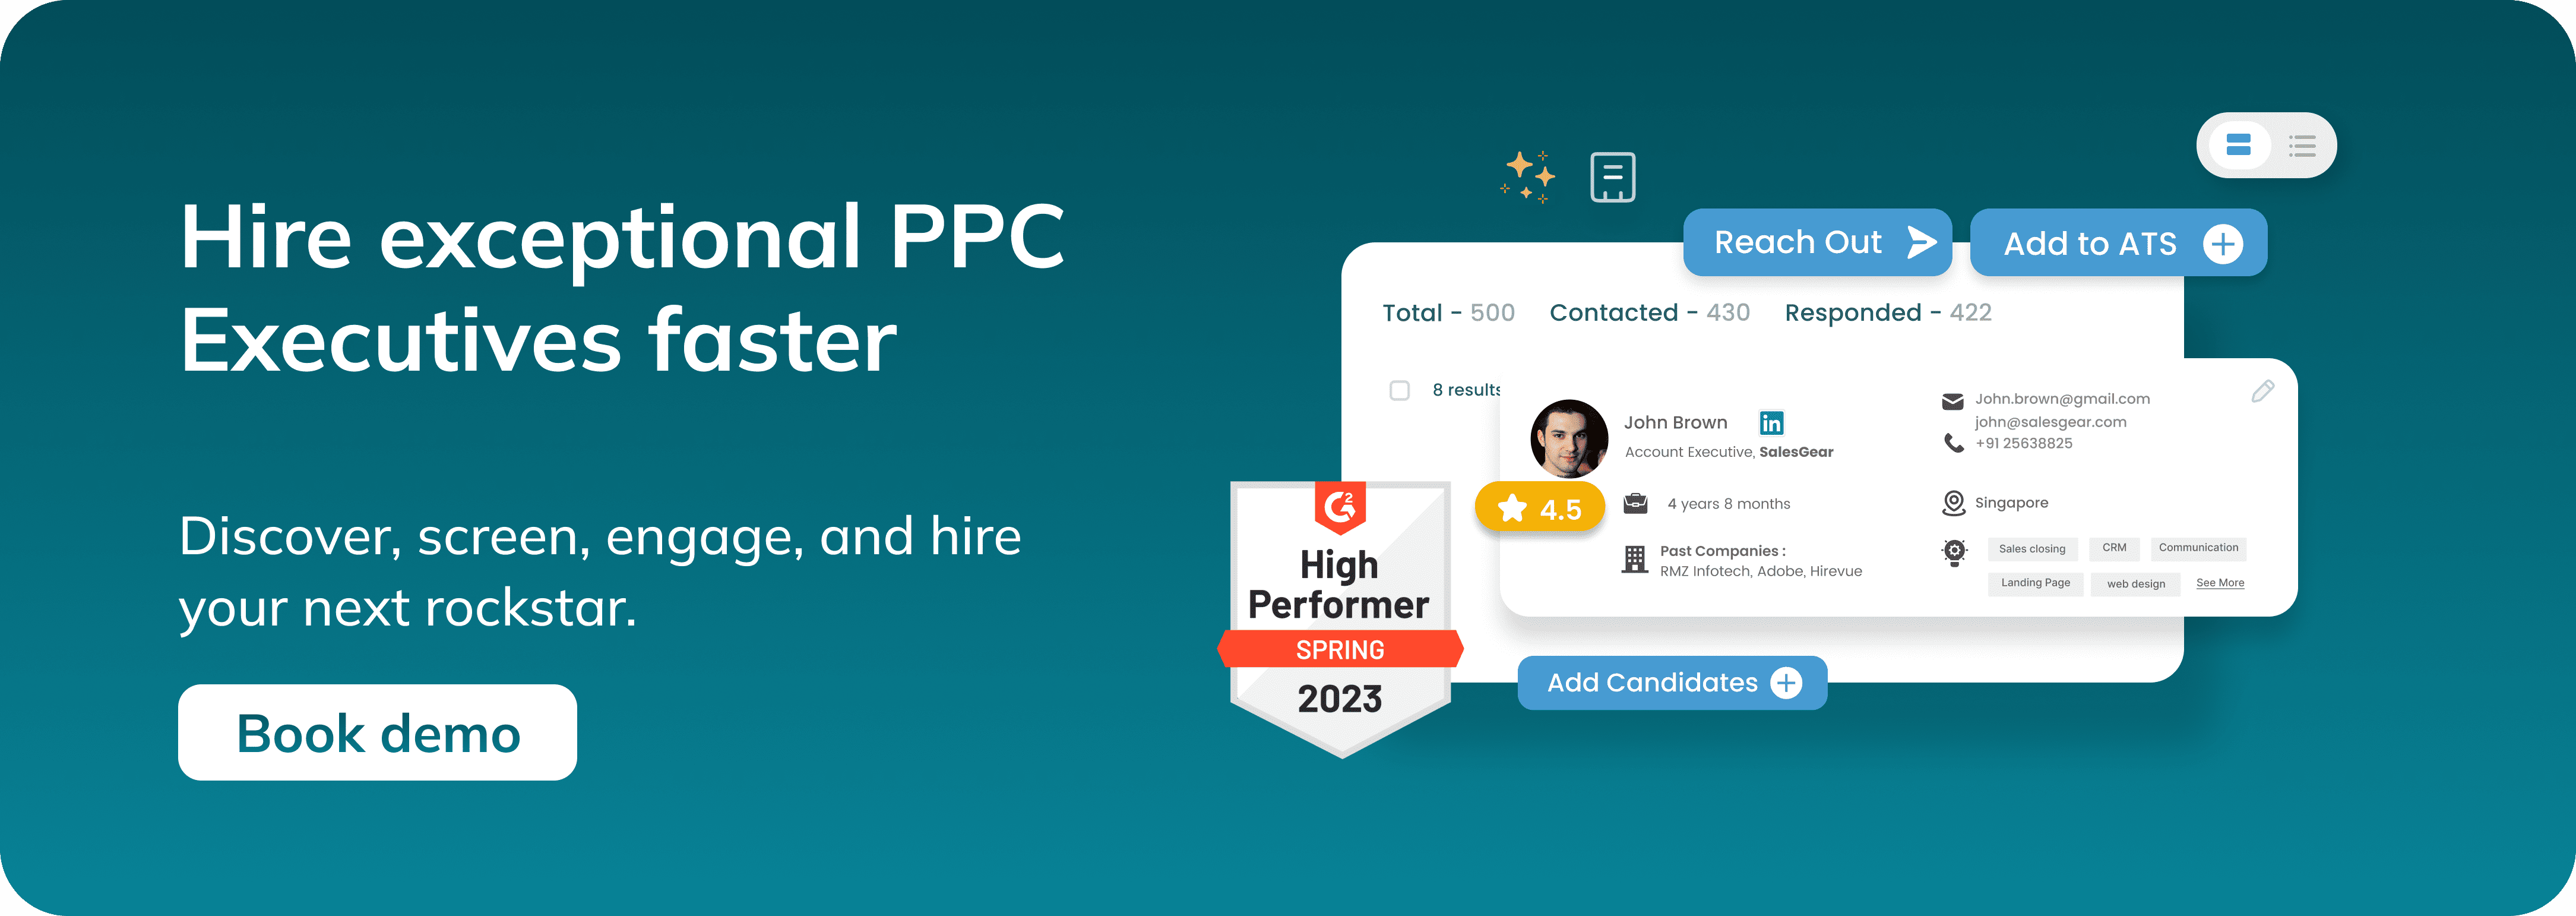 How to hire the perfect PPC Executive.png